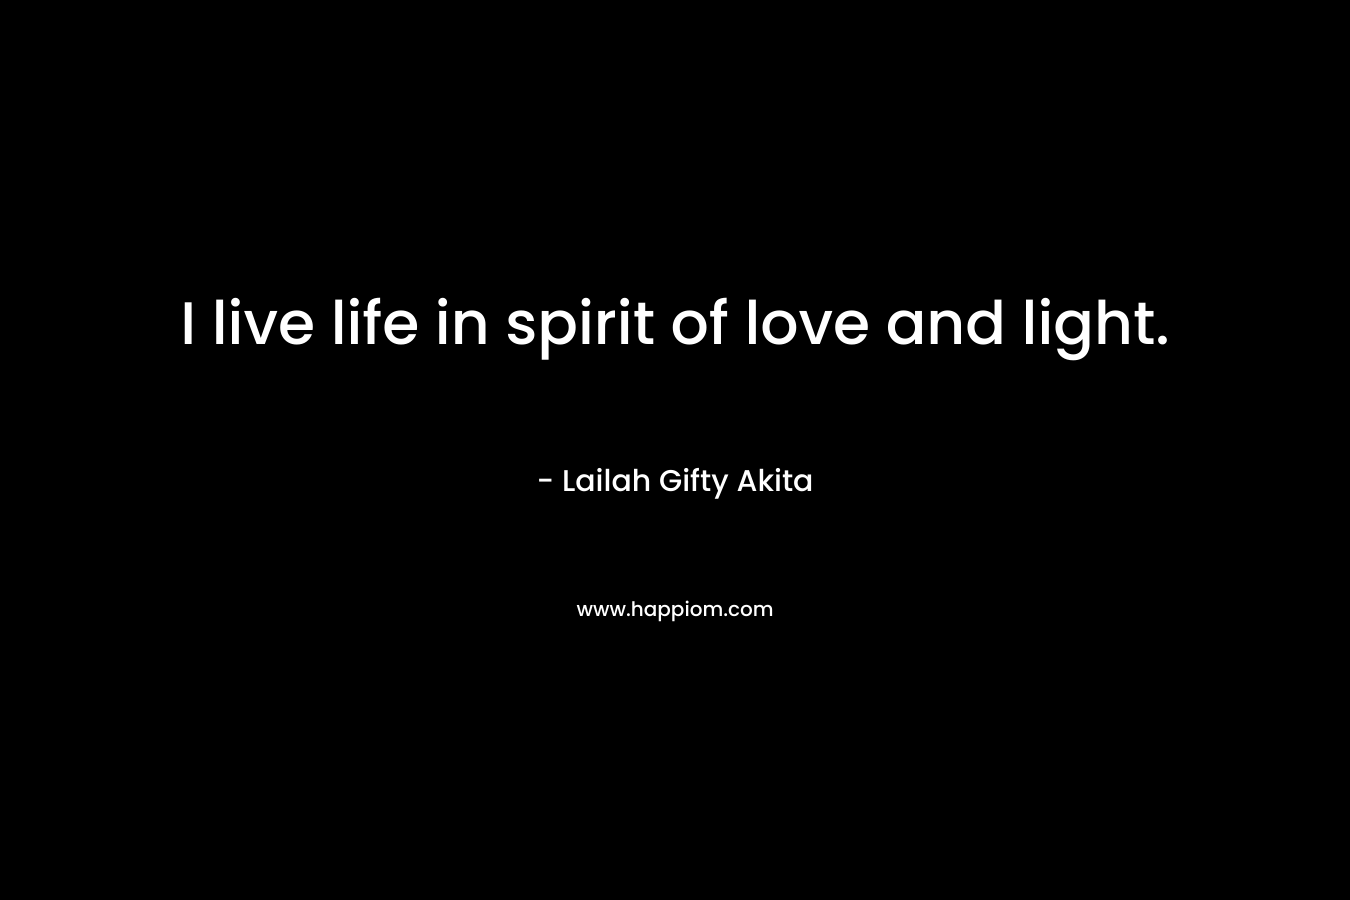 I live life in spirit of love and light.